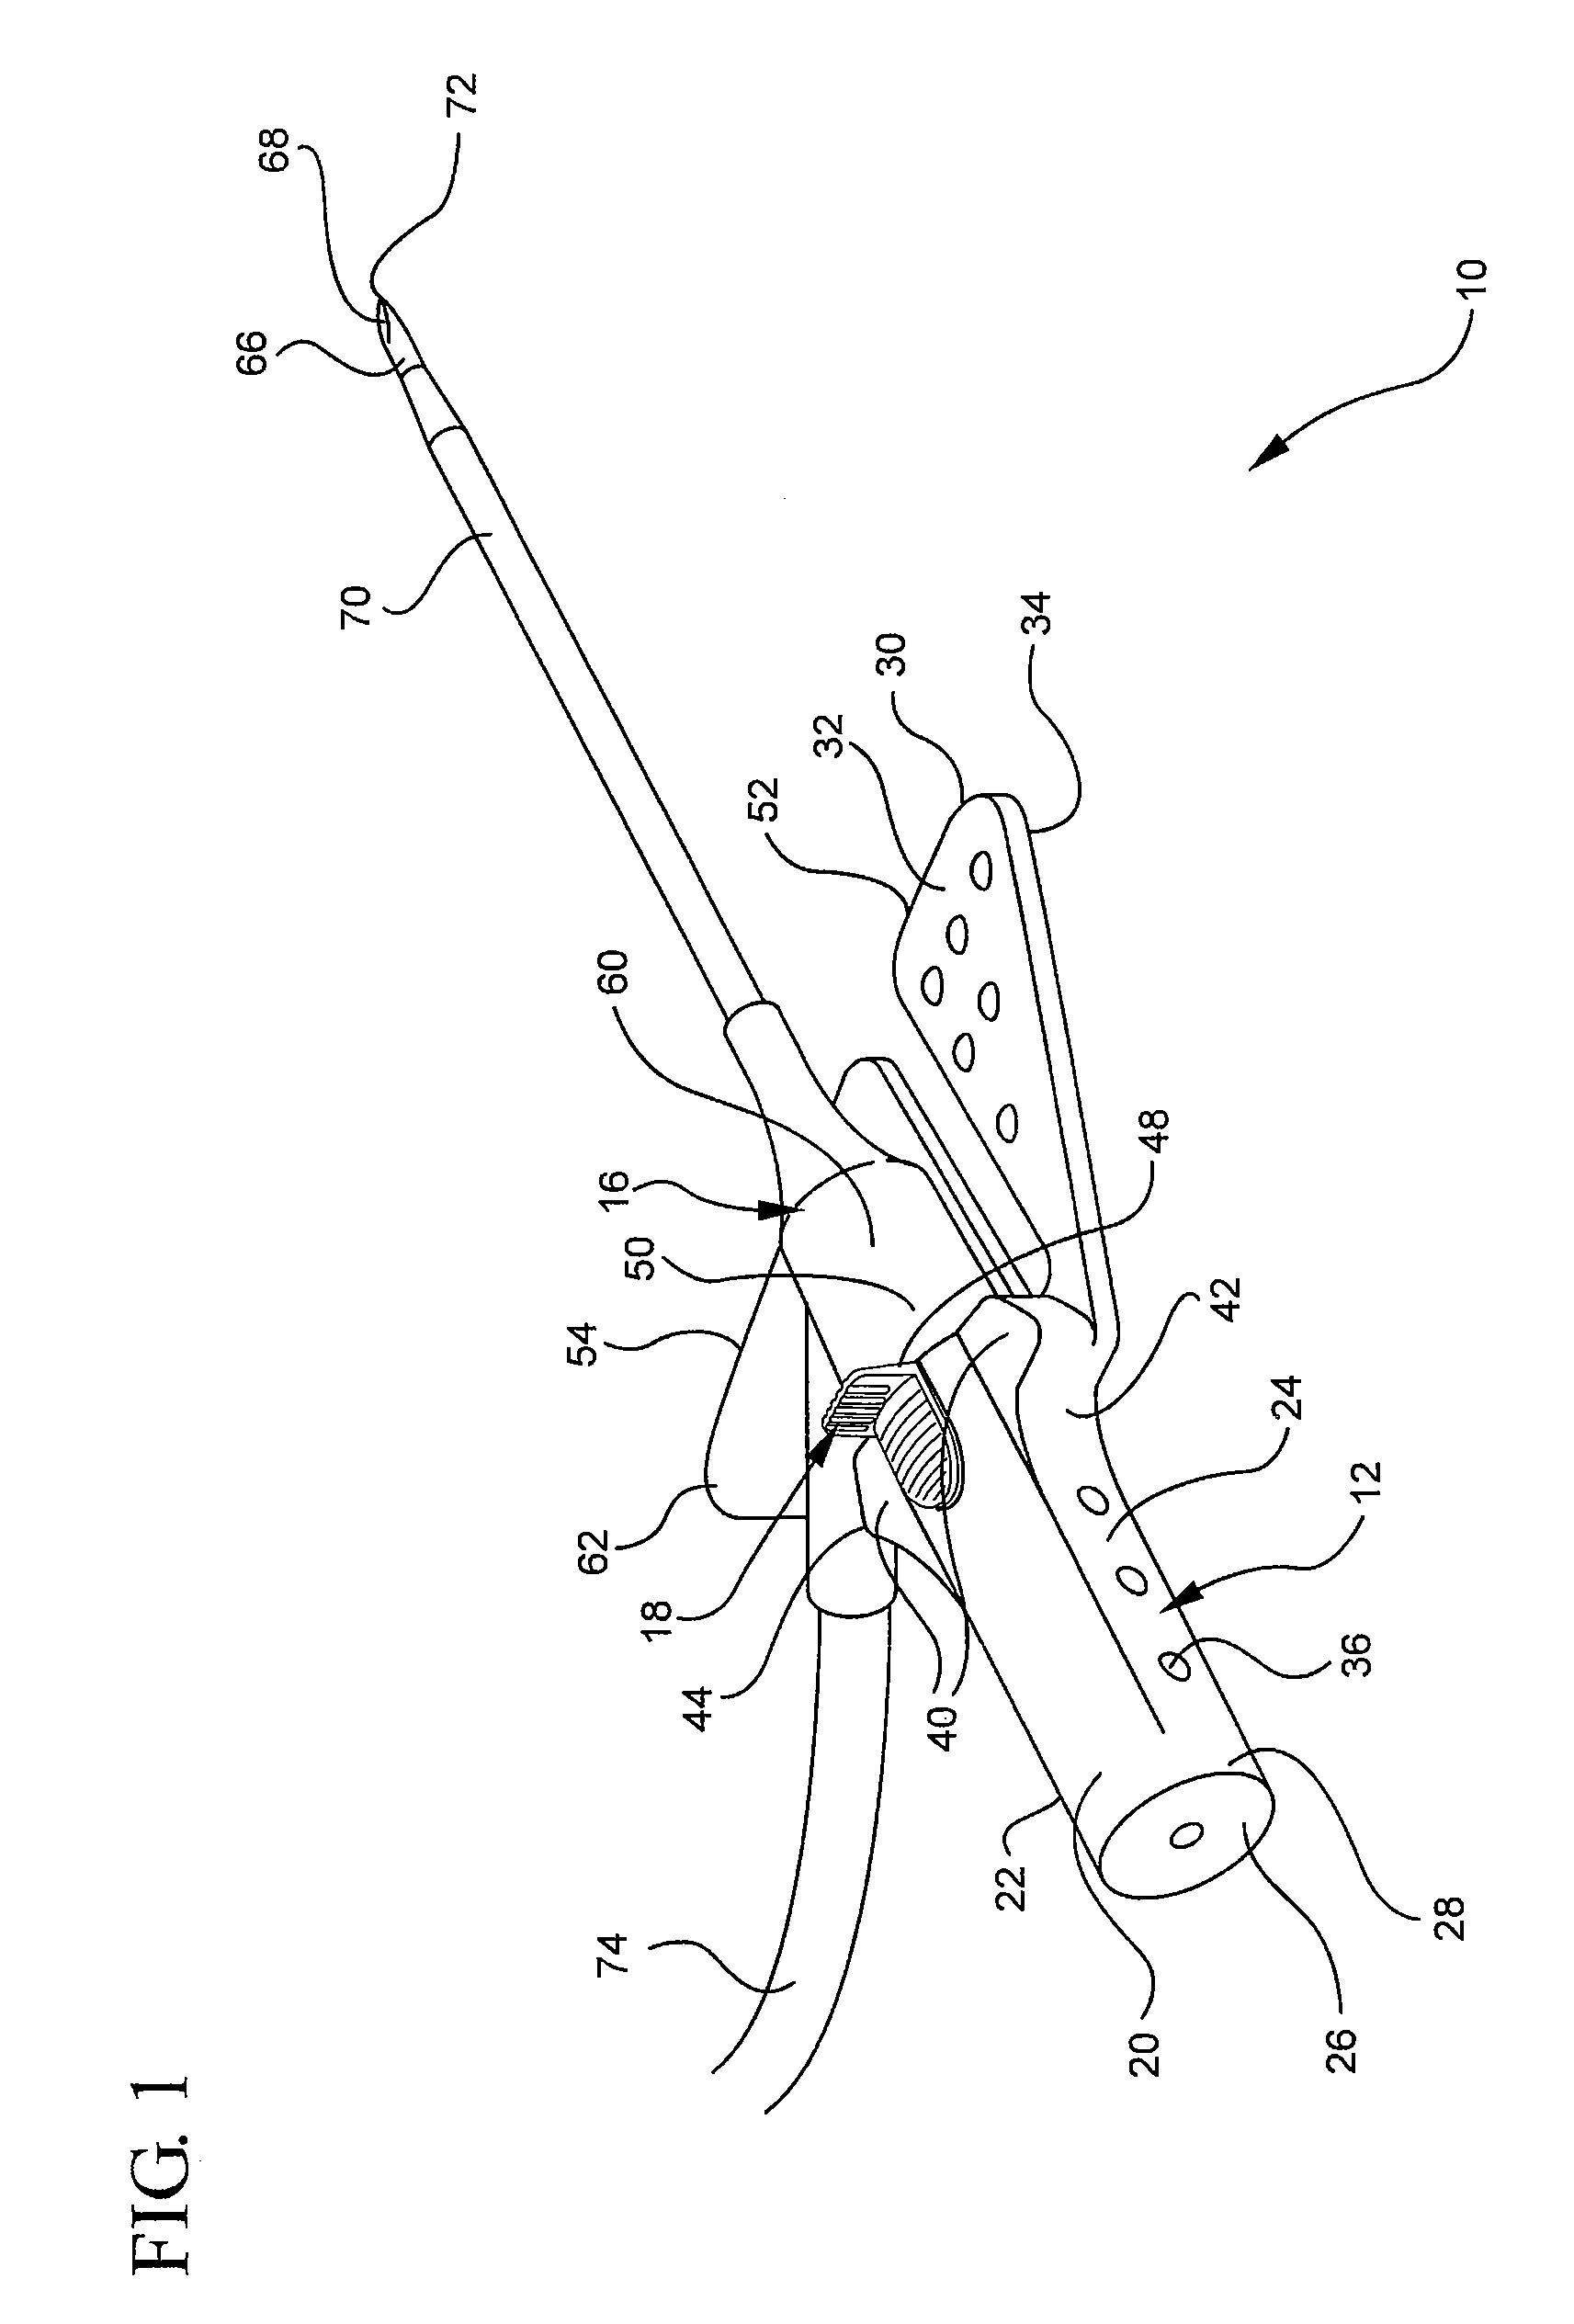 Systems and methods for providing a safety integrated catheter with universal grip